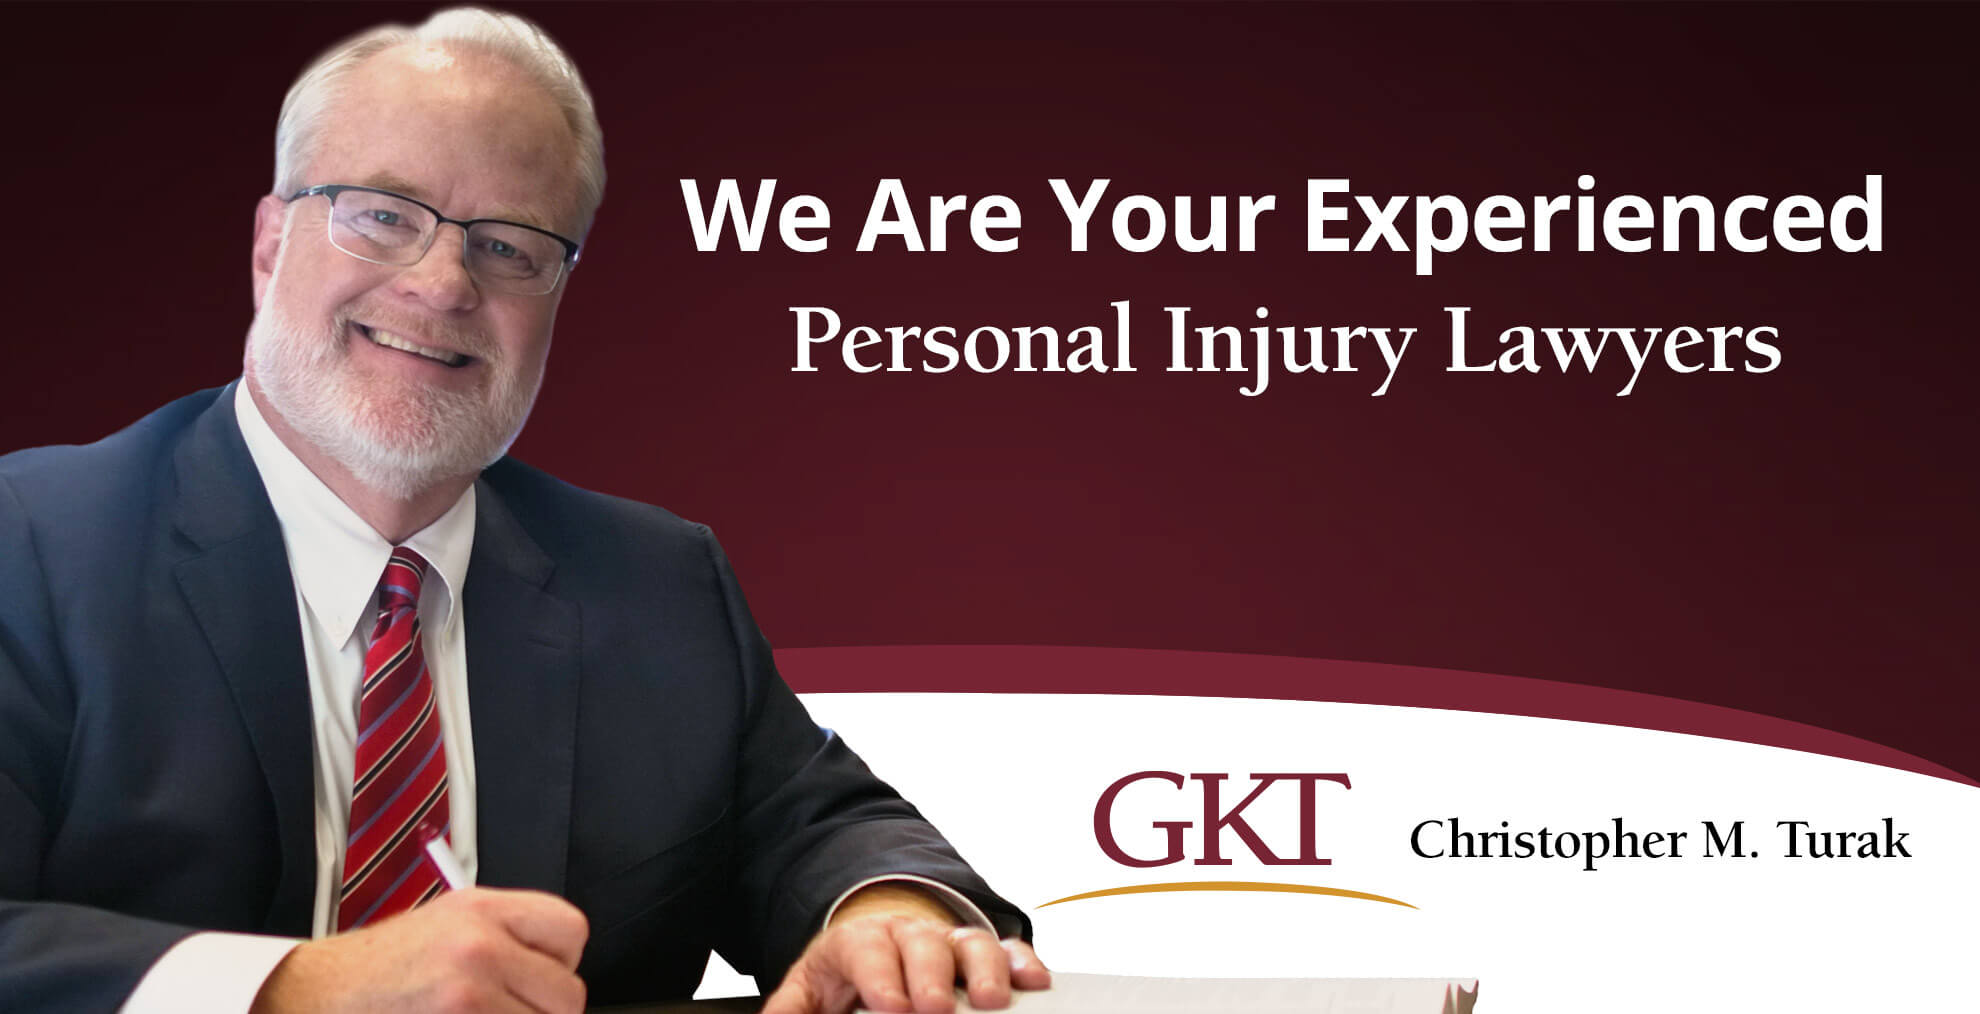 We Are Your Experienced Personal Injury Lawyers - Christopher M. Turak - GKT